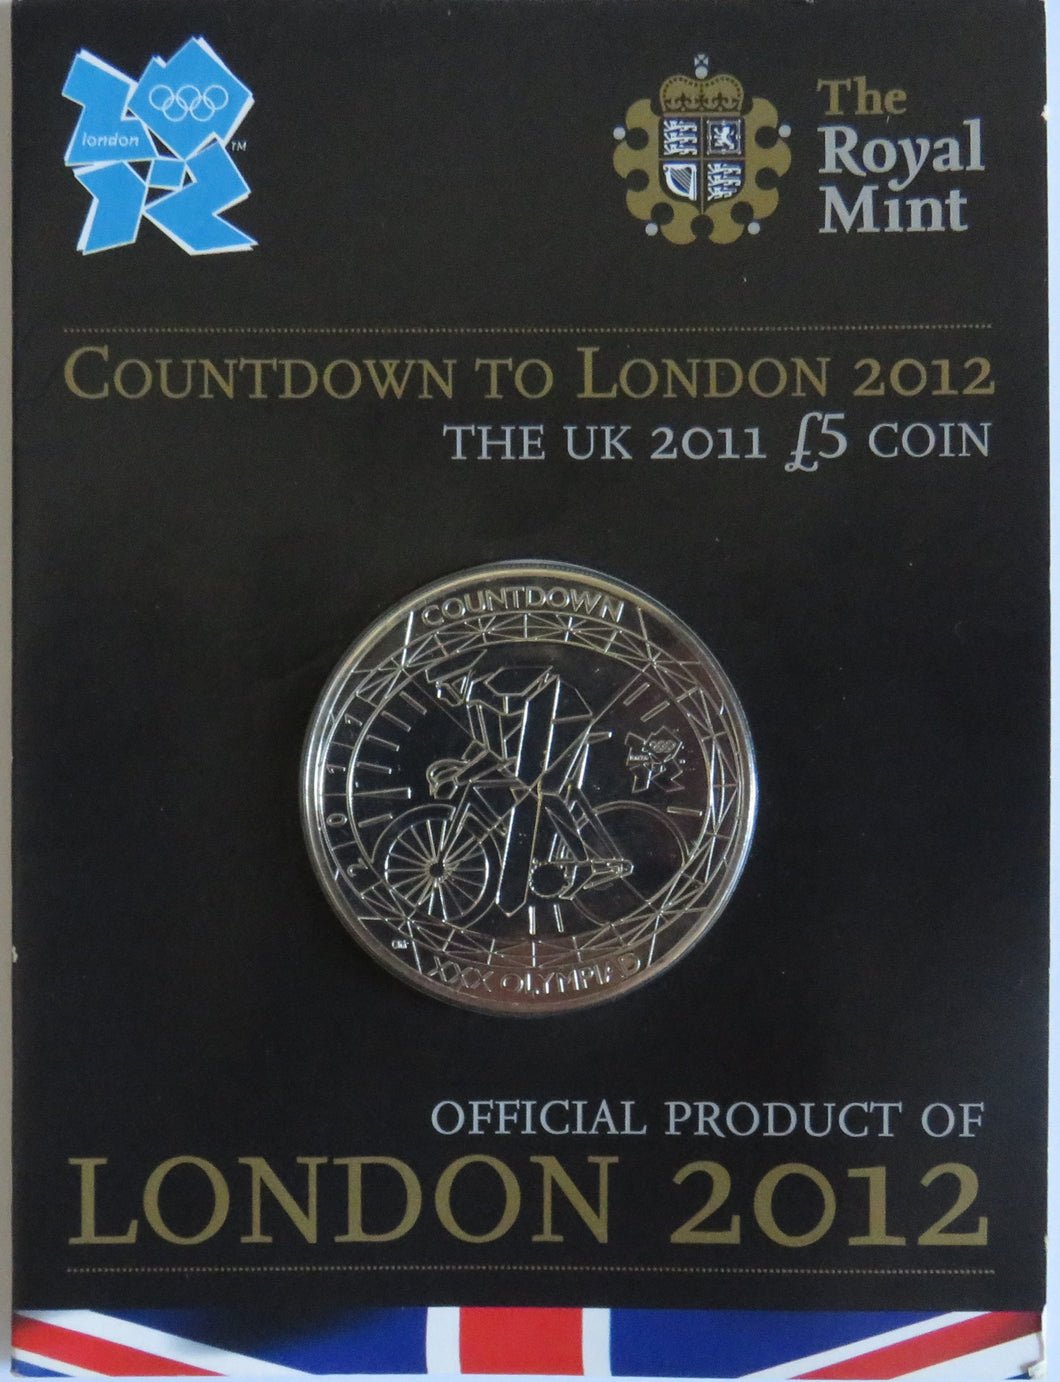 Countdown To London 2012 The UK 2011 £5 Coin